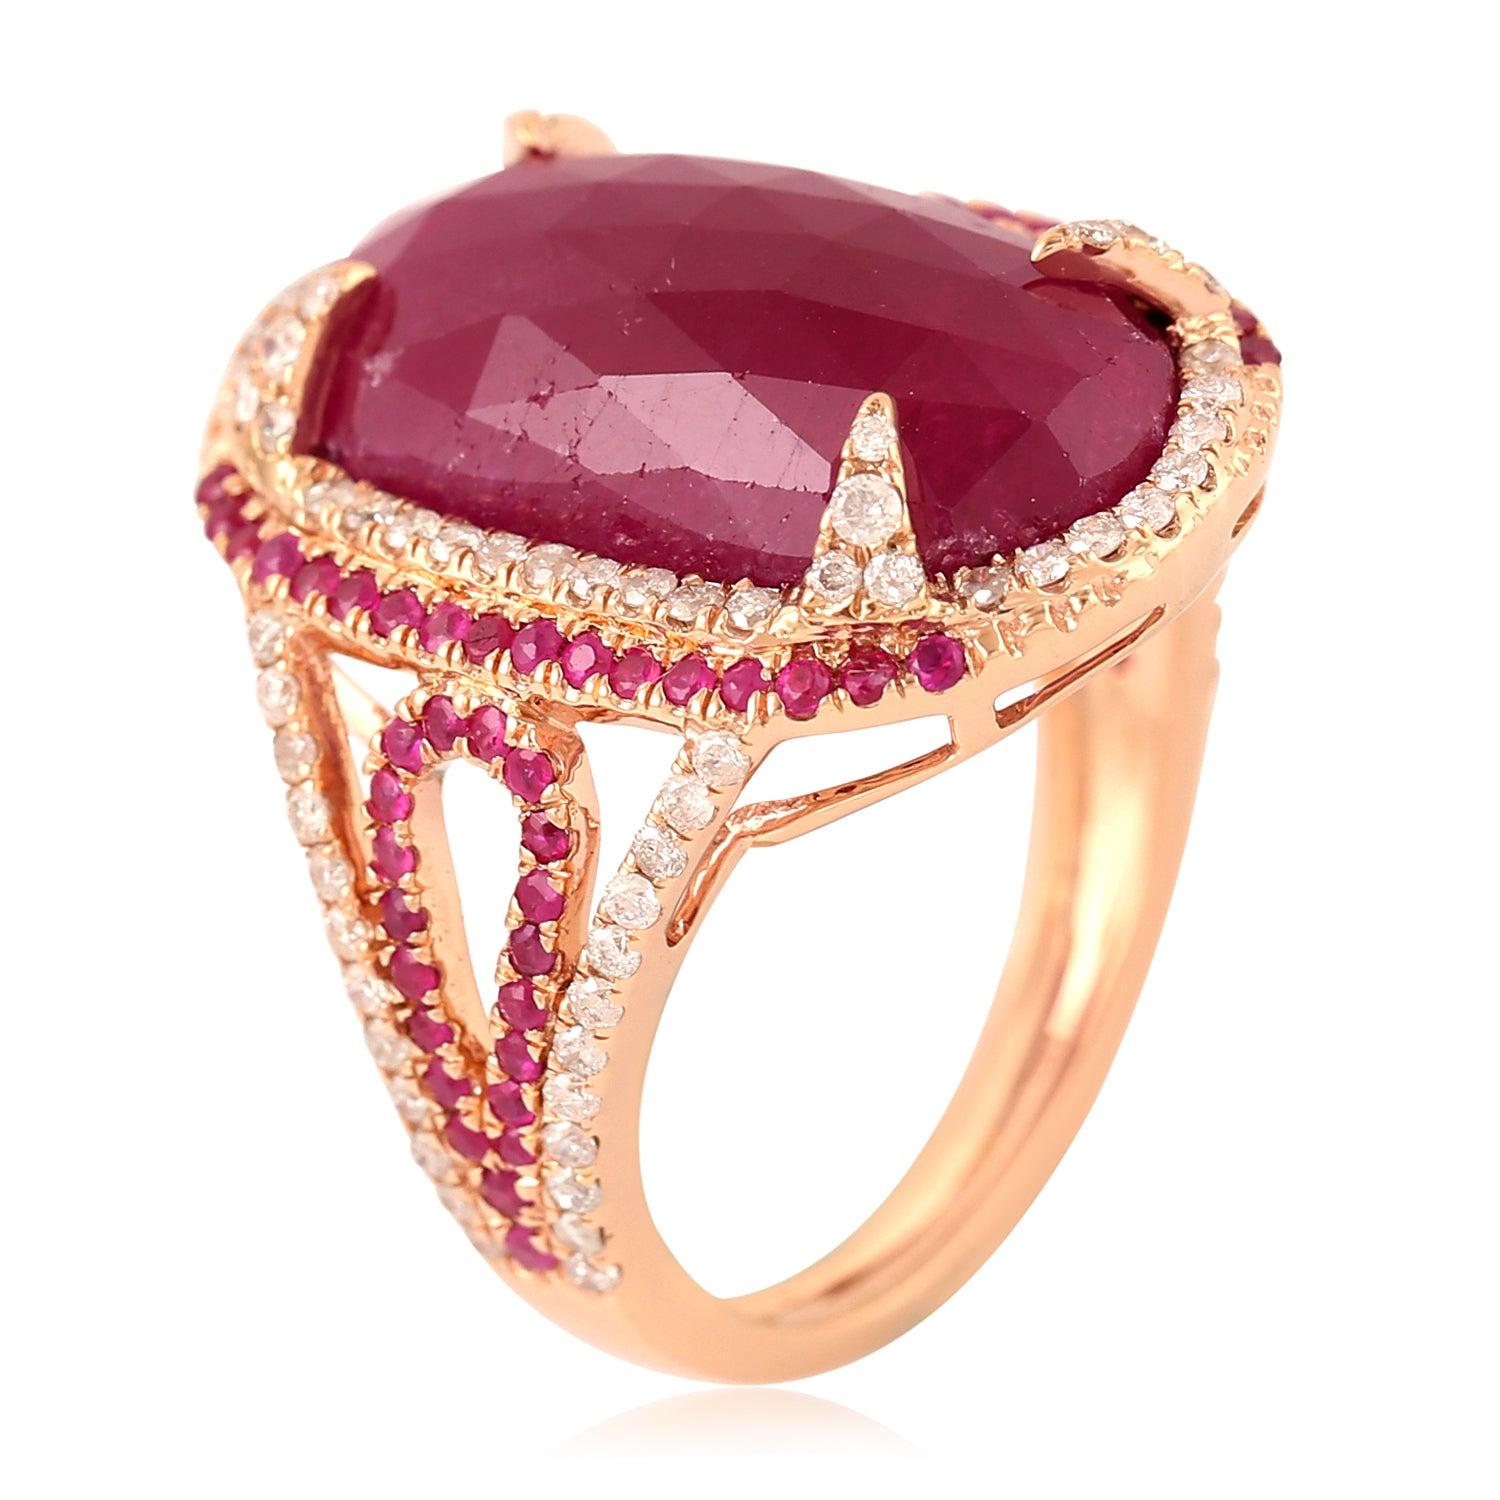 For Sale:  11.67 Carat Ruby Diamond Cocktail Ring 5